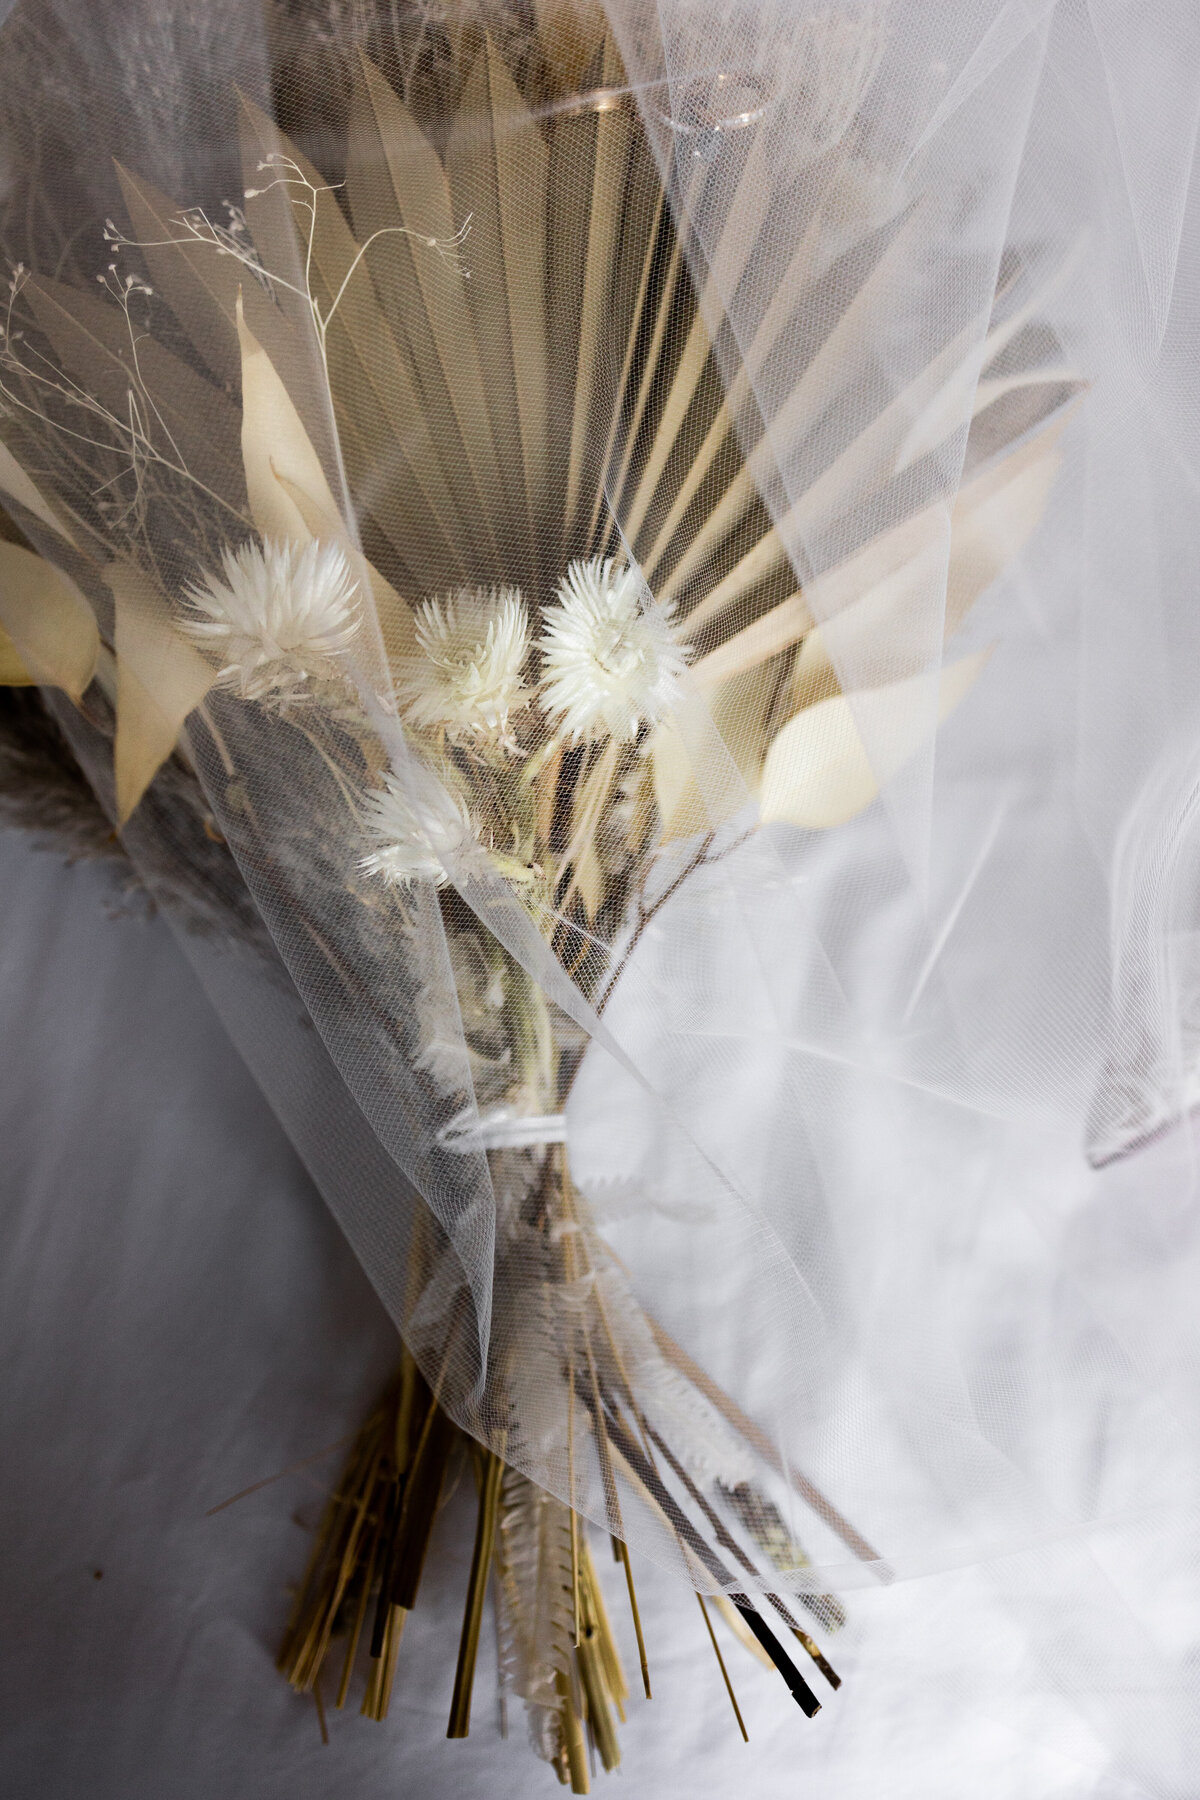 This image captures the essence of bohemian elegance with a stunningly arranged boho-style wedding bouquet. Featuring an eclectic mix of wildflowers, pampas grass, and delicate greenery, the bouquet radiates a whimsical, free-spirited vibe. Soft, natural light enhances the subtle colors and textures, making it a perfect inspiration for brides planning a boho-themed wedding. This photograph is an ideal showcase for florists and wedding planners aiming to promote unique, trend-setting floral arrangements.